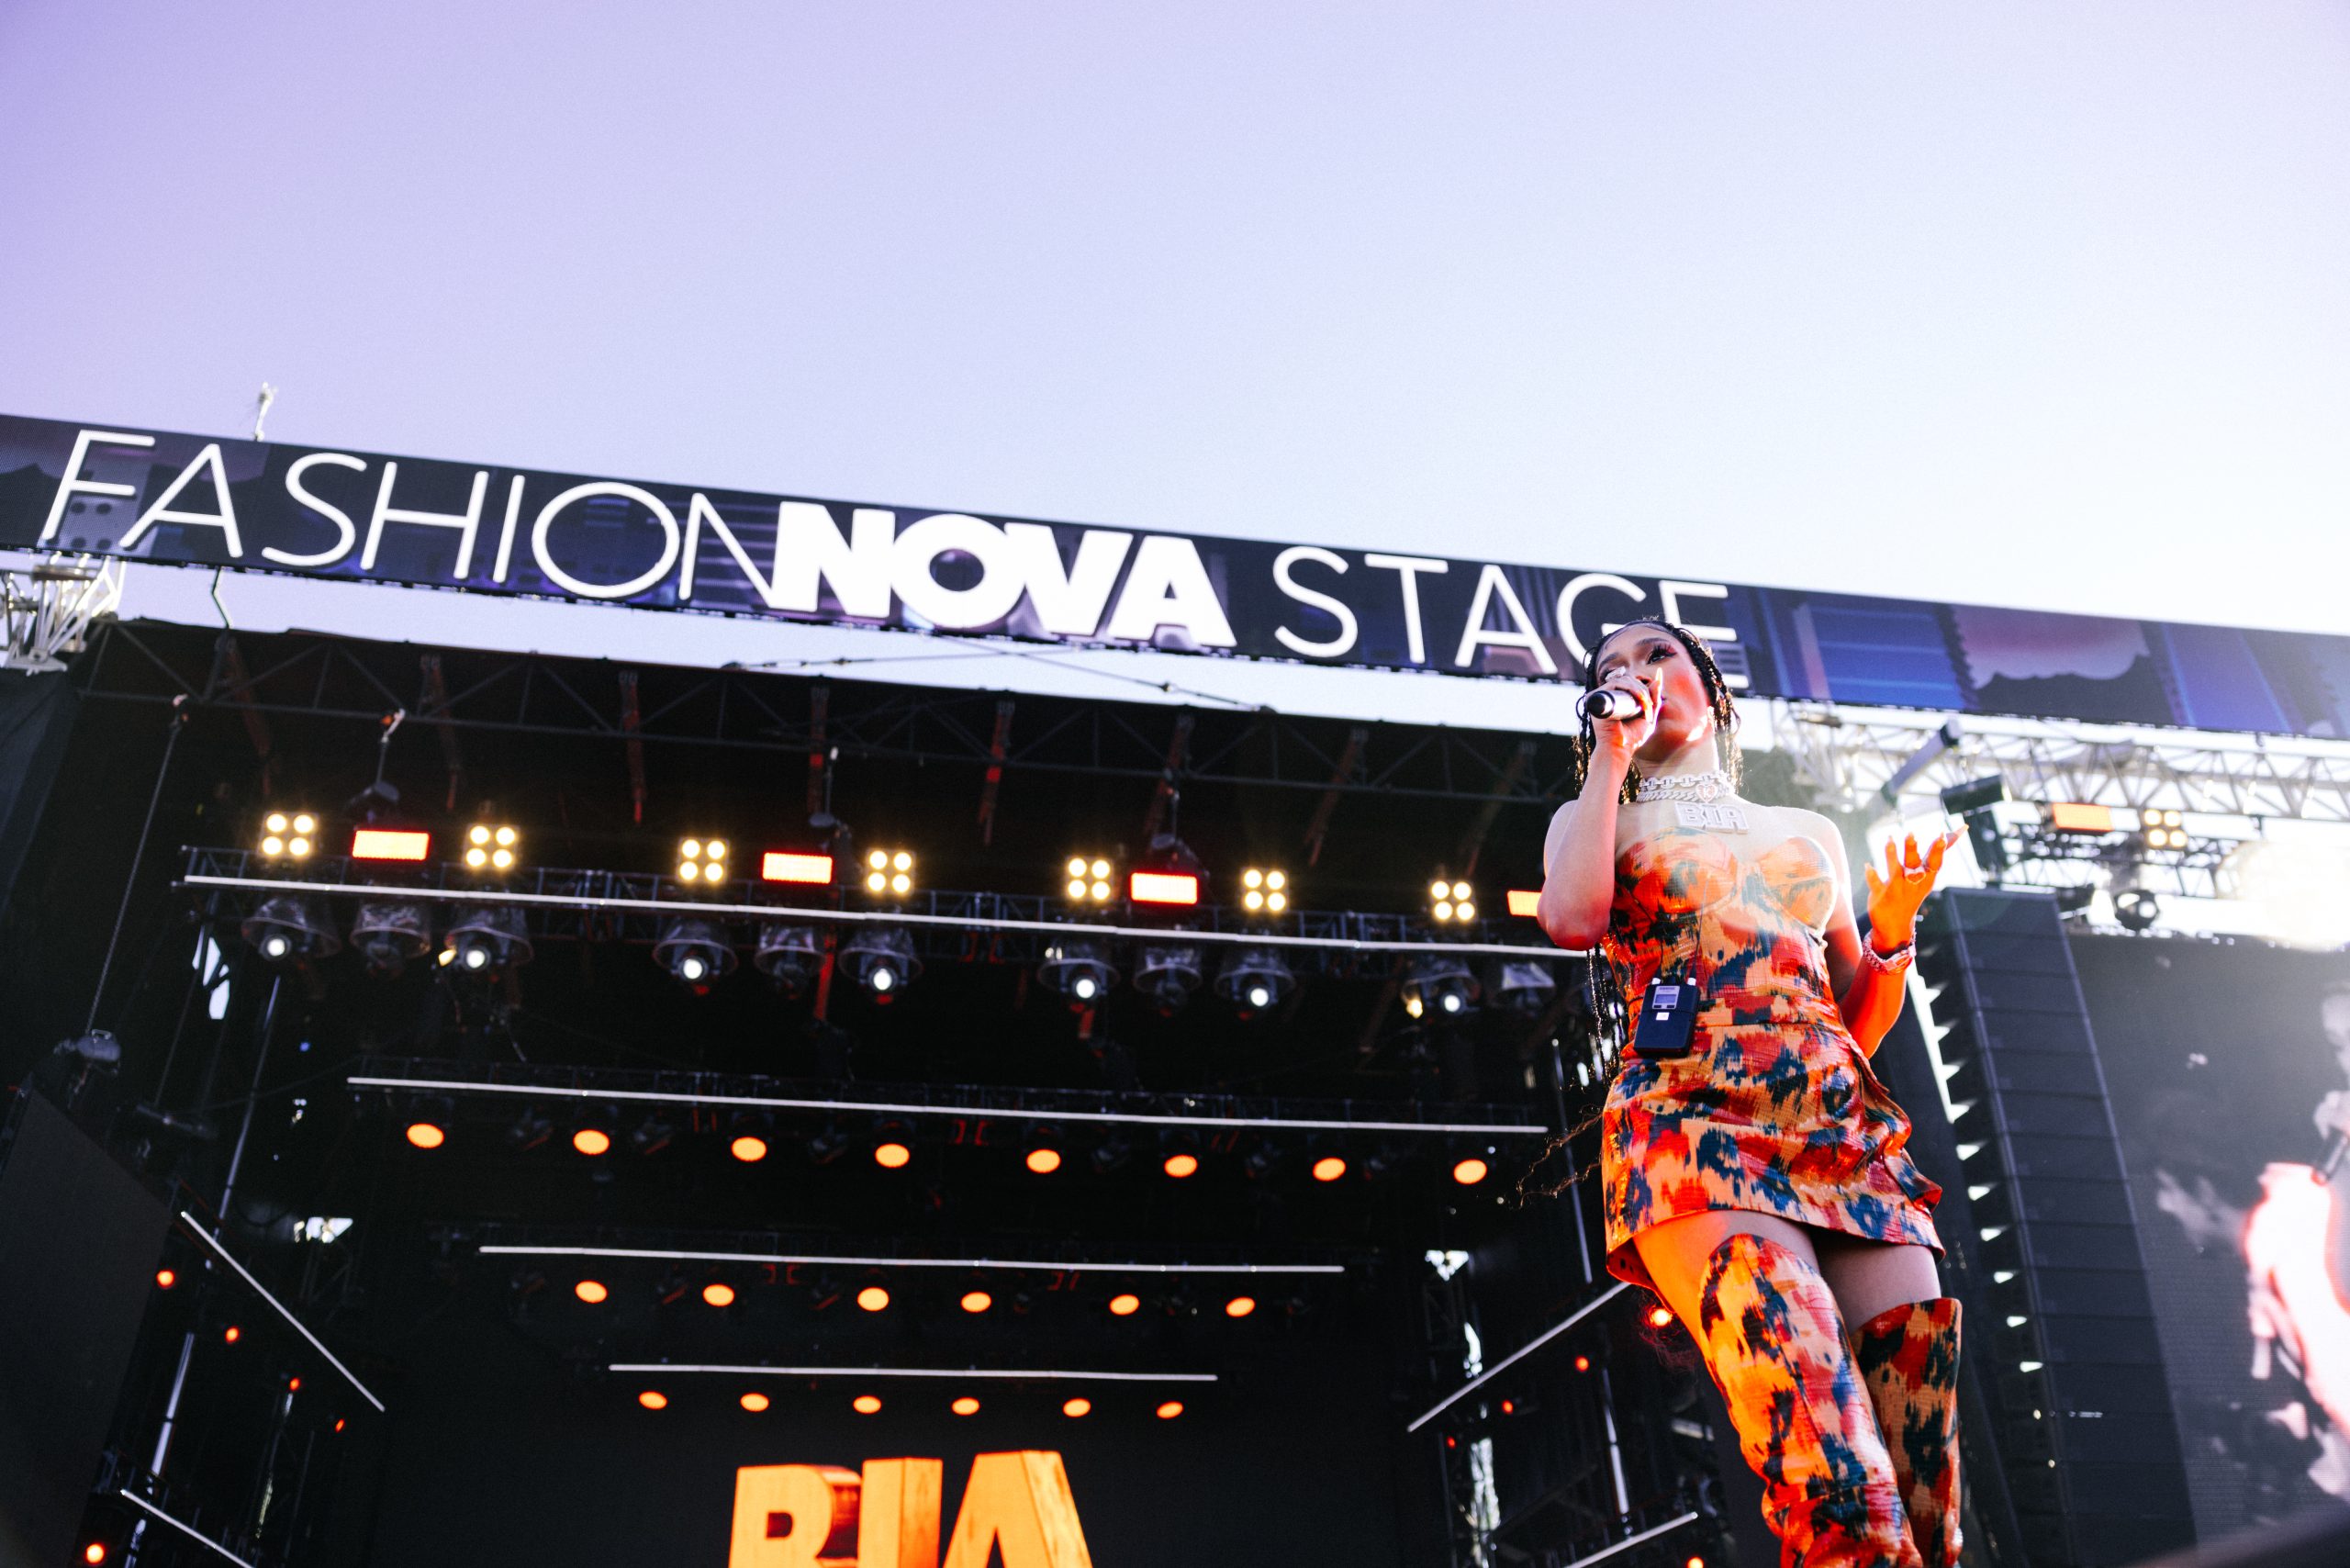 Bia performs at the Fashion Nova Stage at Rolling Loud New York 2022 at Citi Field in Queens, New York on Sunday, September 25. PHOTO CREDIT: Meraki House for Fashion Nova